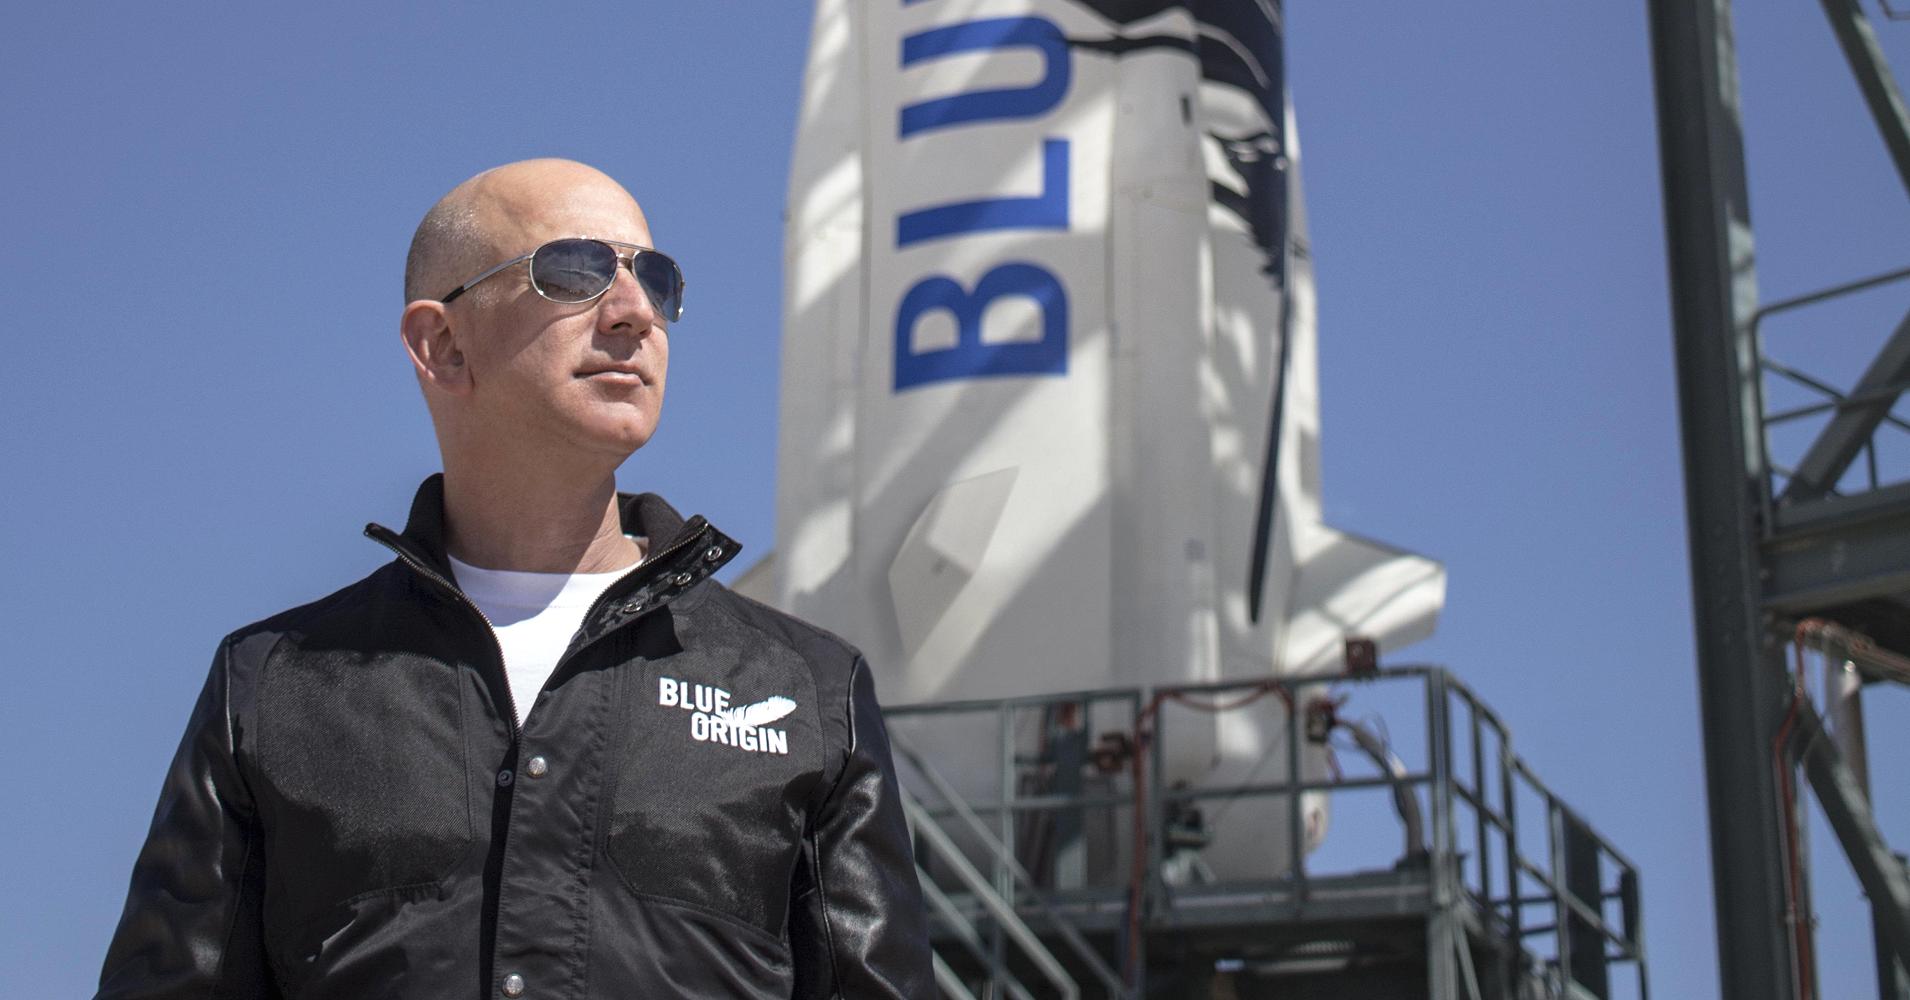 Blue Origin space tourism tickets will reportedly sell for $200,000 -$300,000 next year